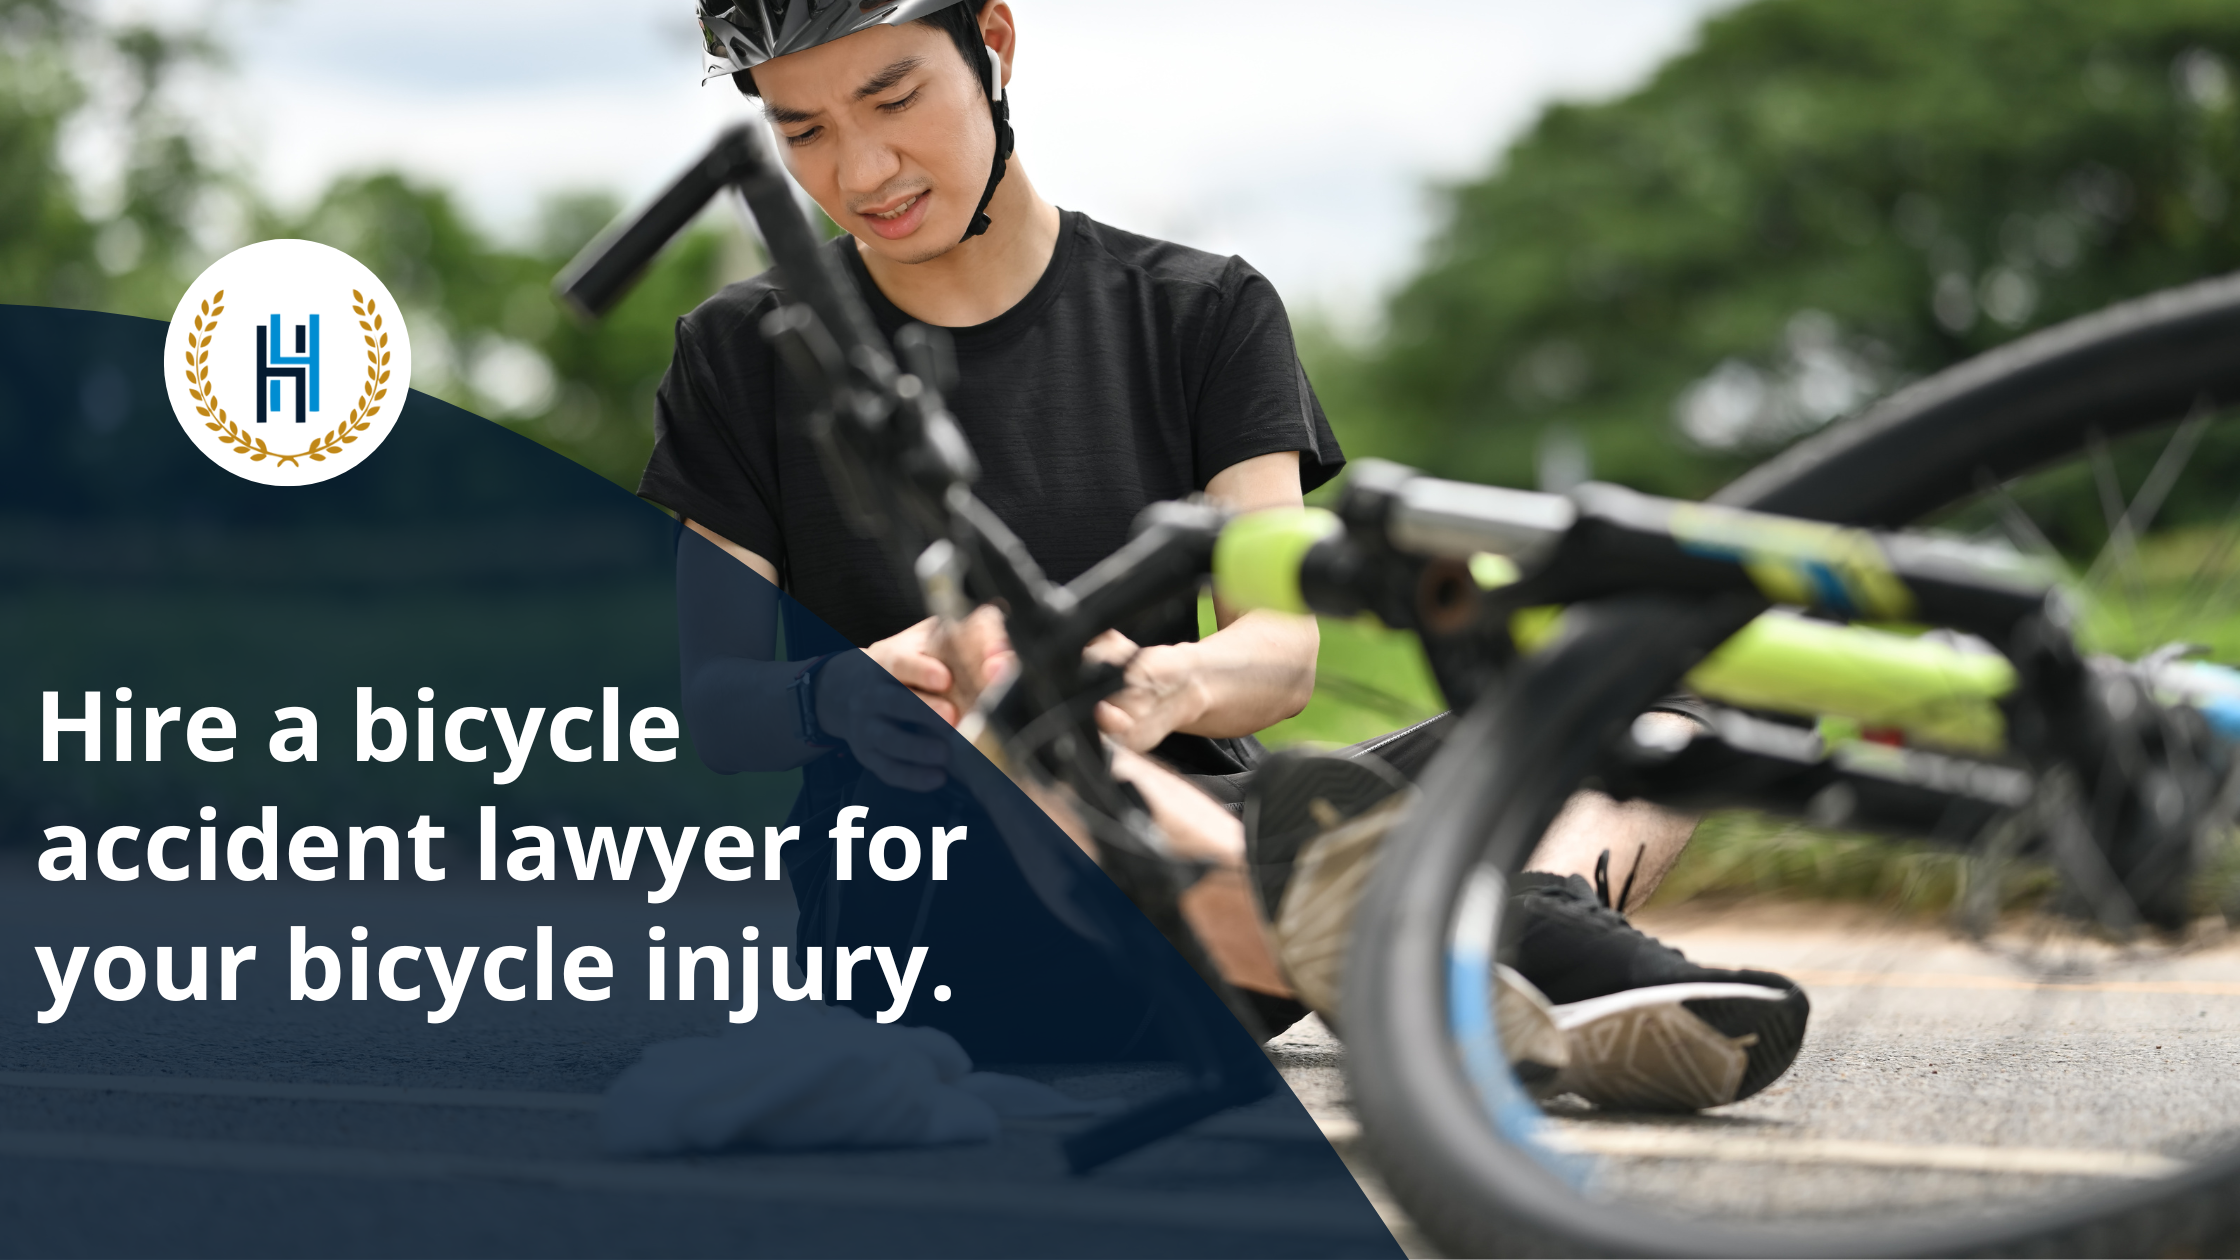 _Hire a bicycle accident lawyer for your bicycle injury. | 2H Law Firm